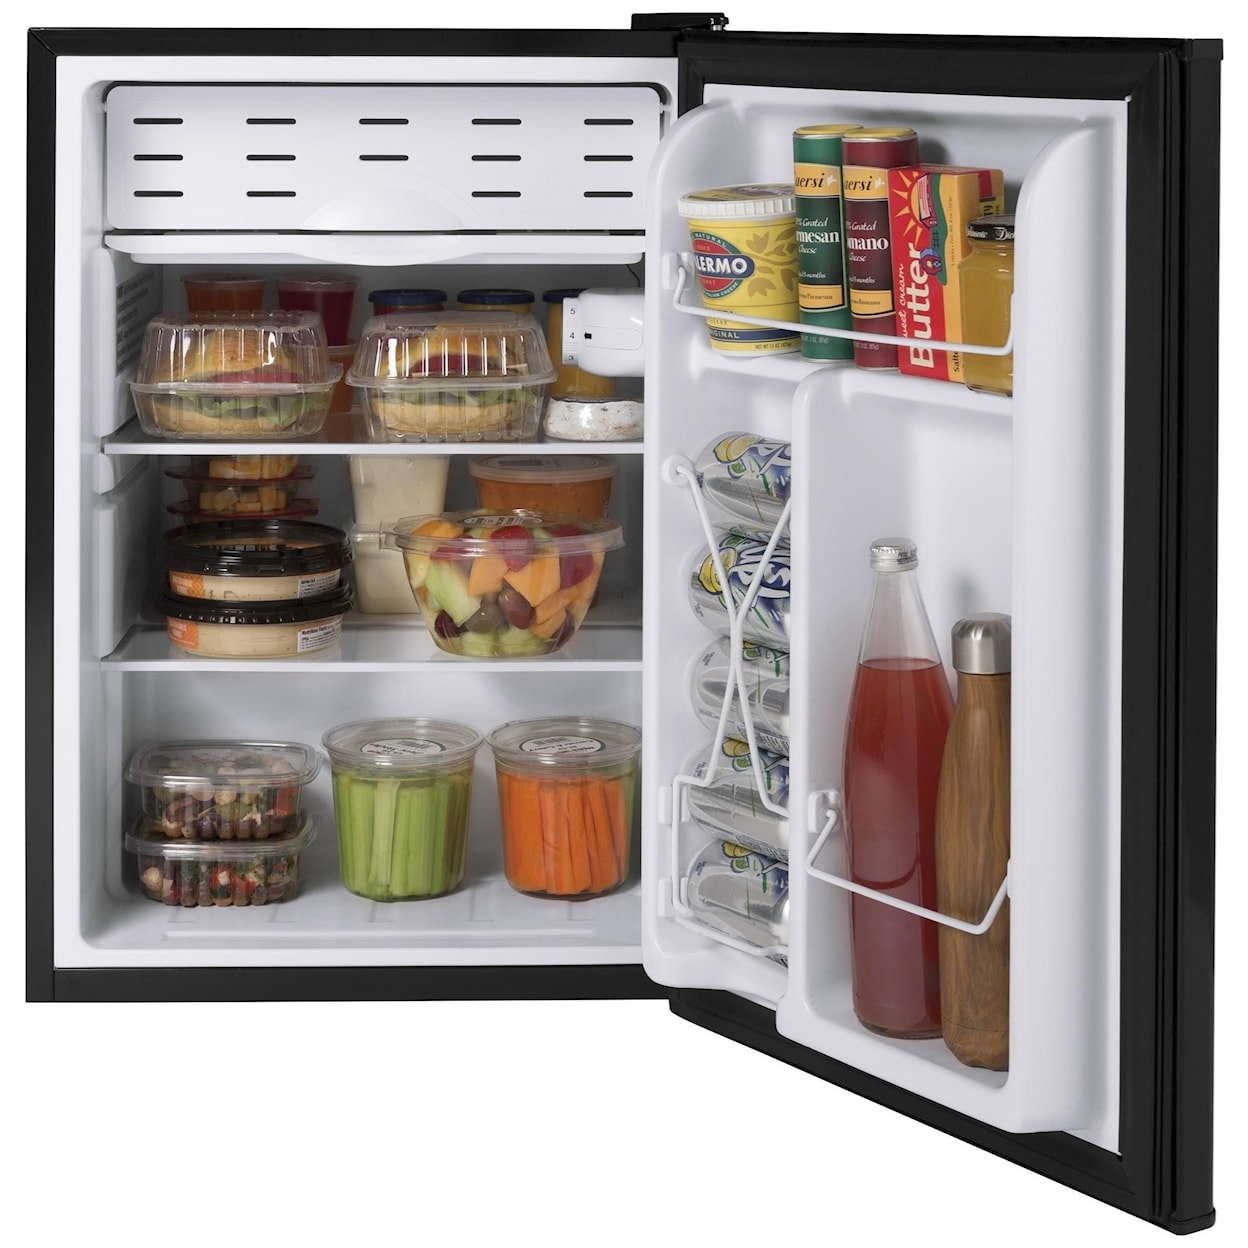 GE Appliances Hotpoint Refrigeration Hotpoint® 2.7 cu. ft. Compact Refrigerator